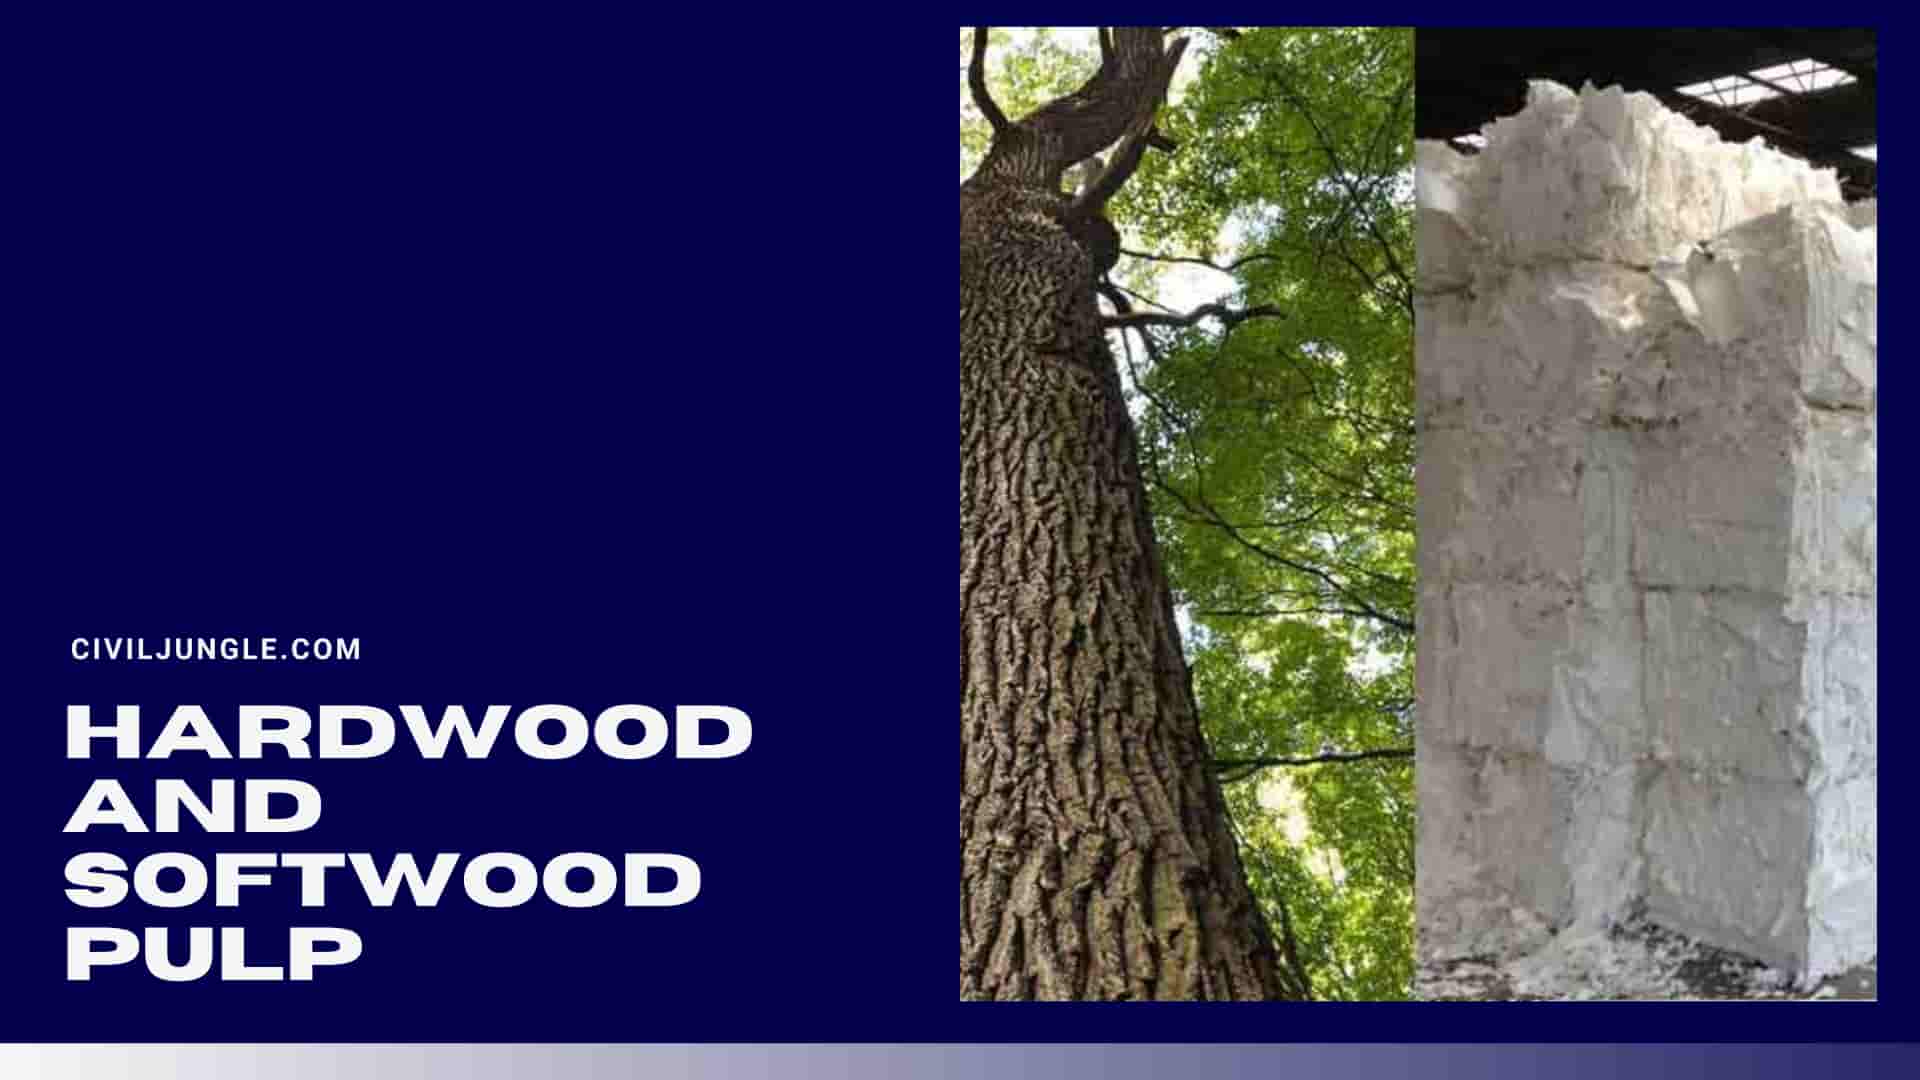 Hardwood and Softwood Pulp